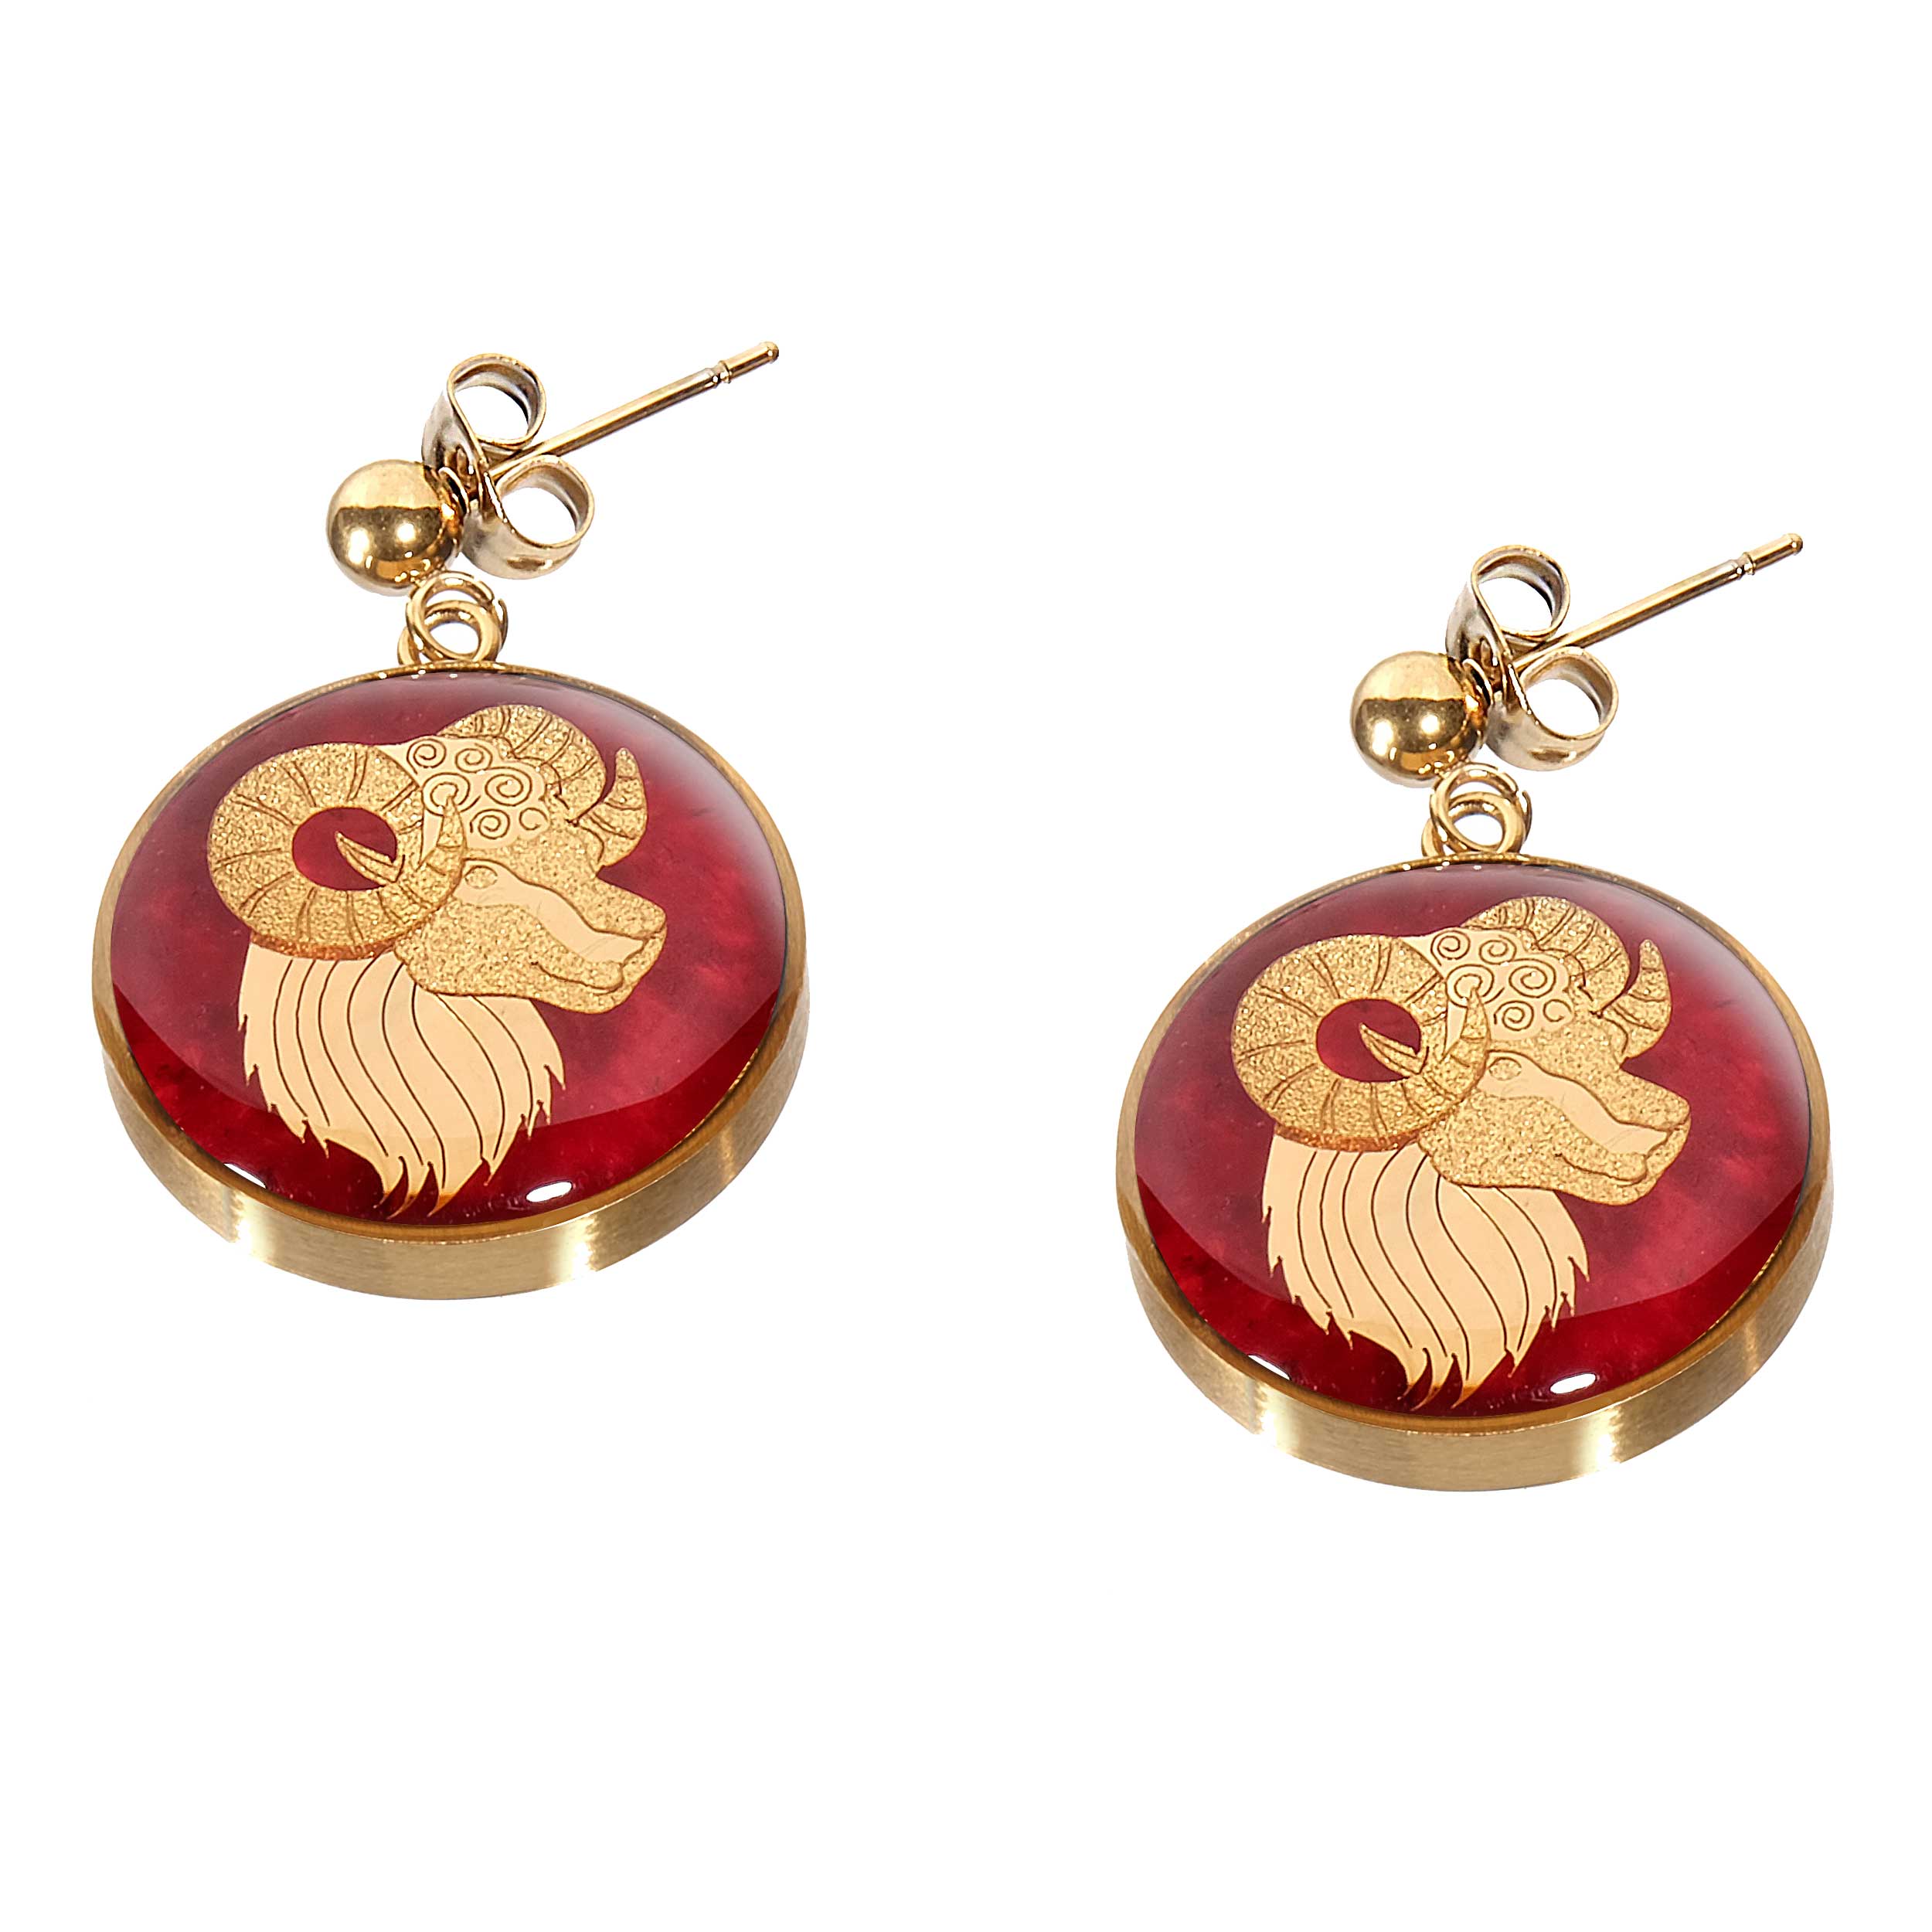 Jade stone earrings and 24 carat gold leaf with the symbol design of April